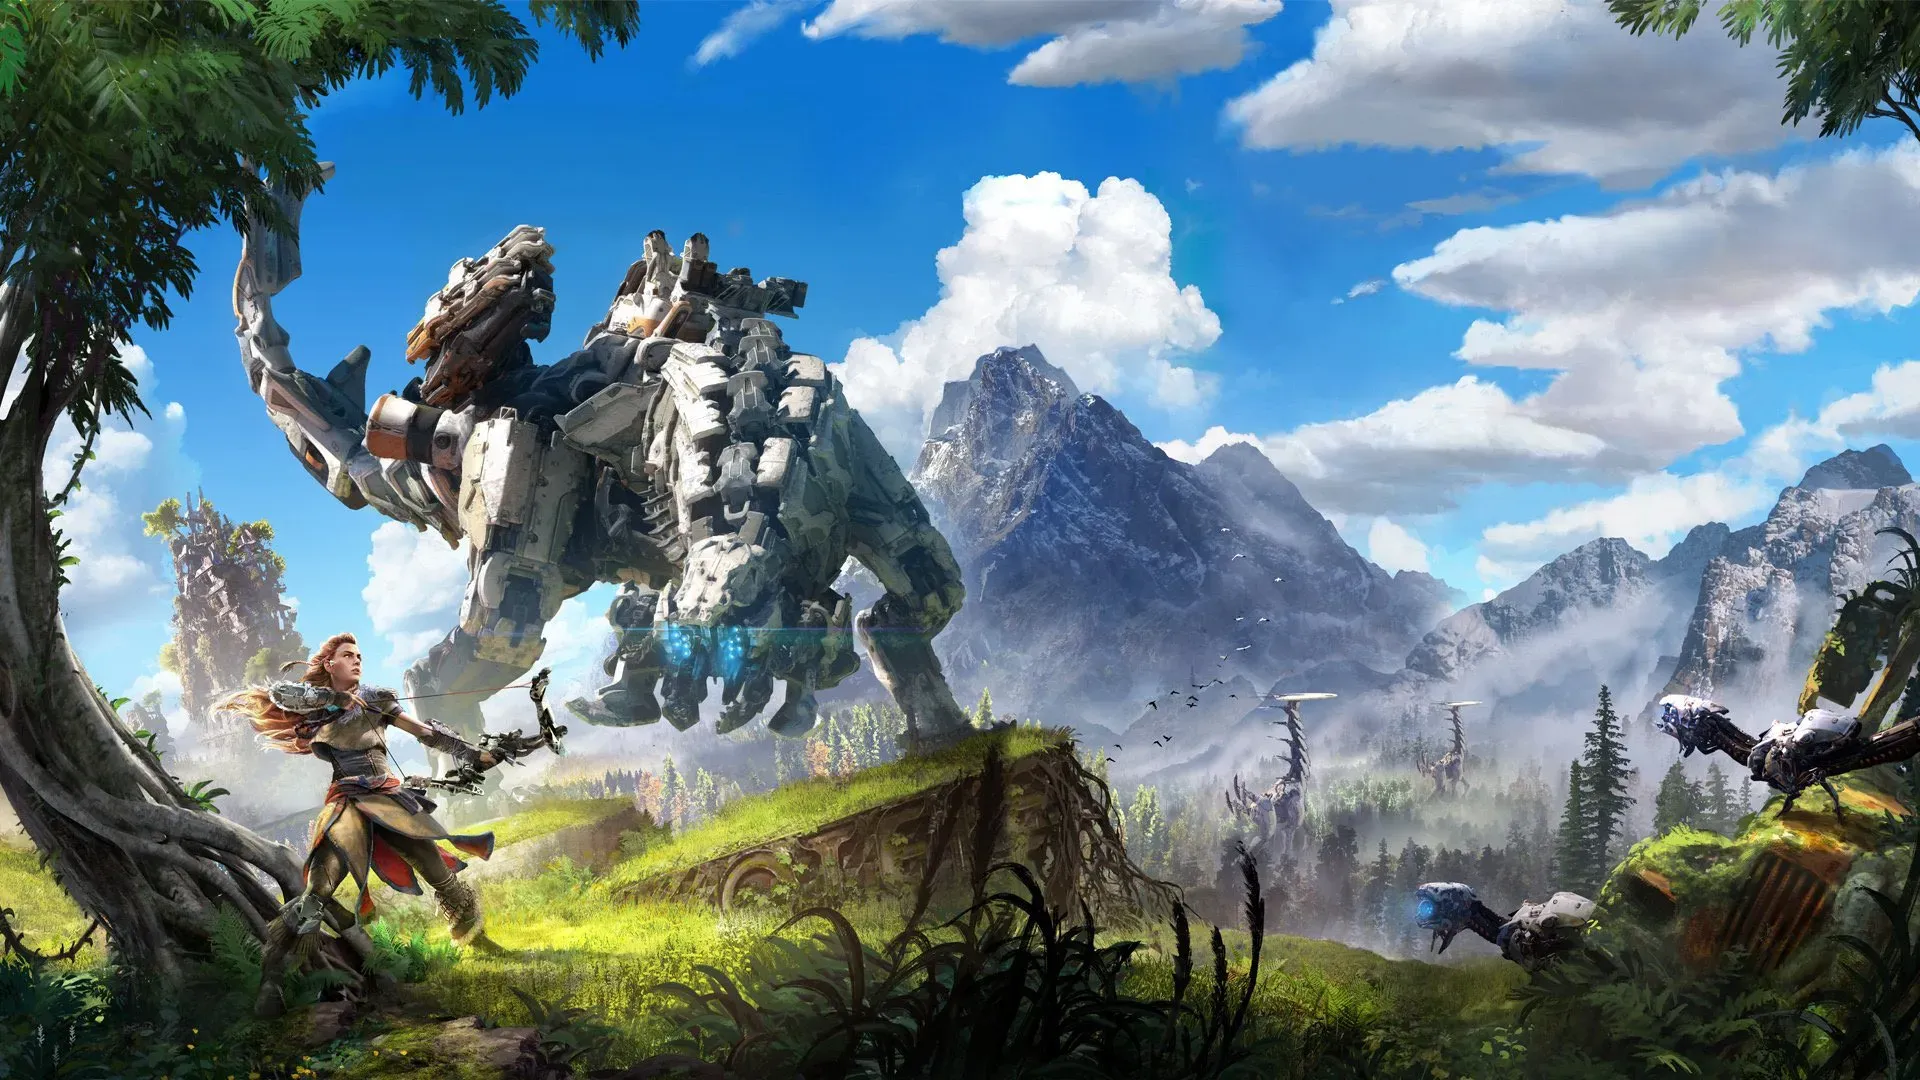 'Horizon Zero Dawn' will be adapted into a live-action series, produced by Steve Blackman | FMV6